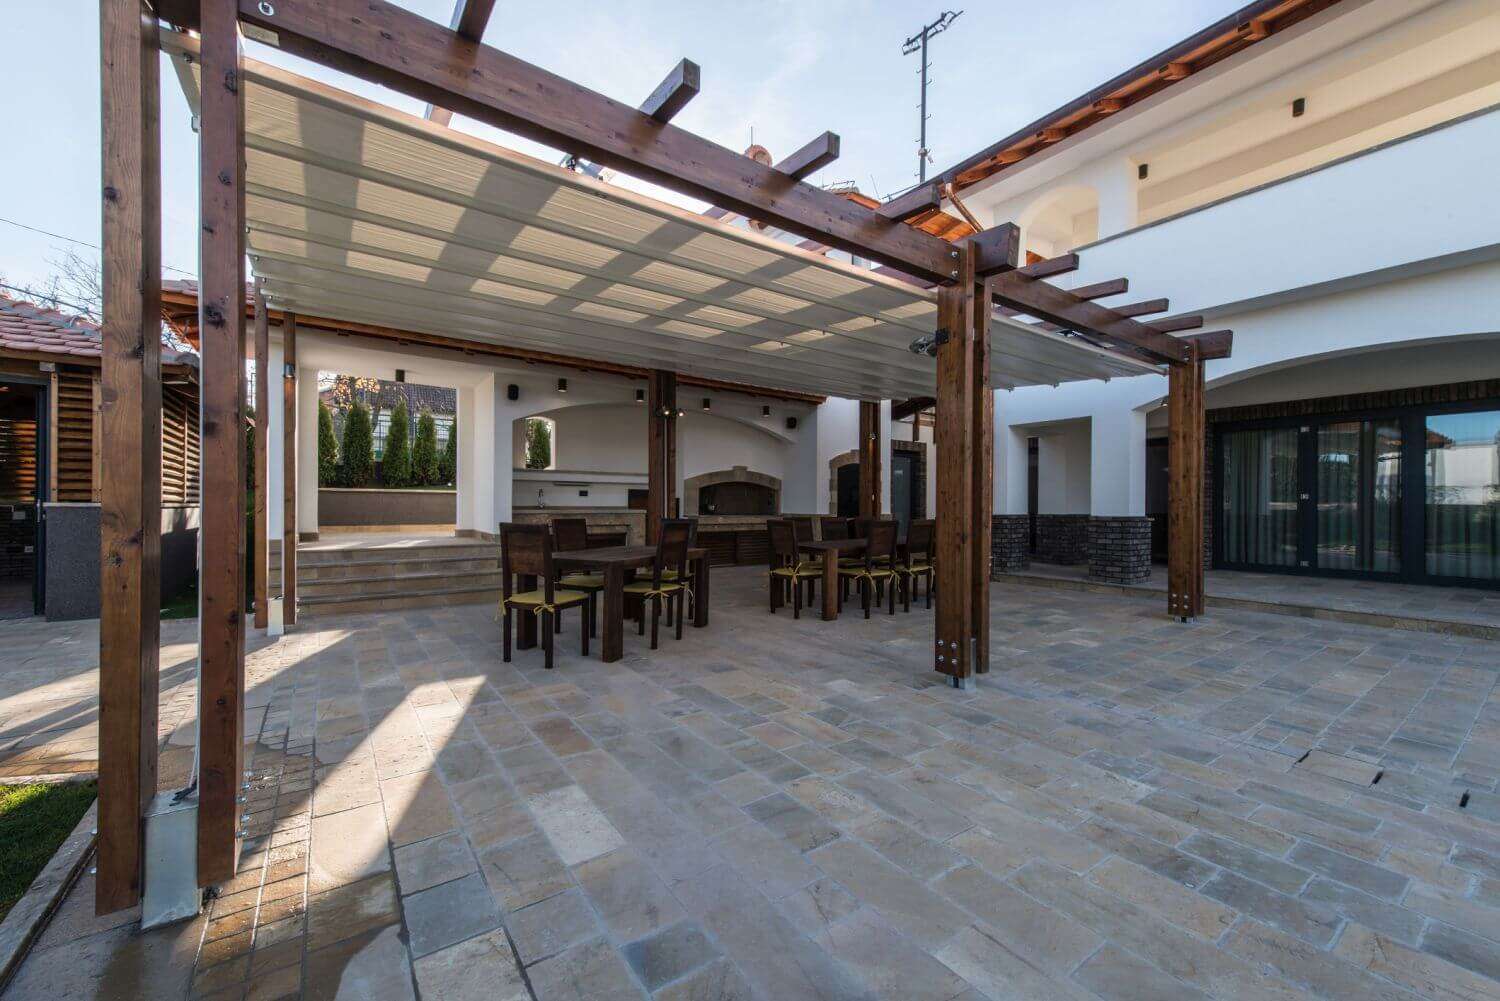 How To Install A Pergola On A Paver Patio at Home ...